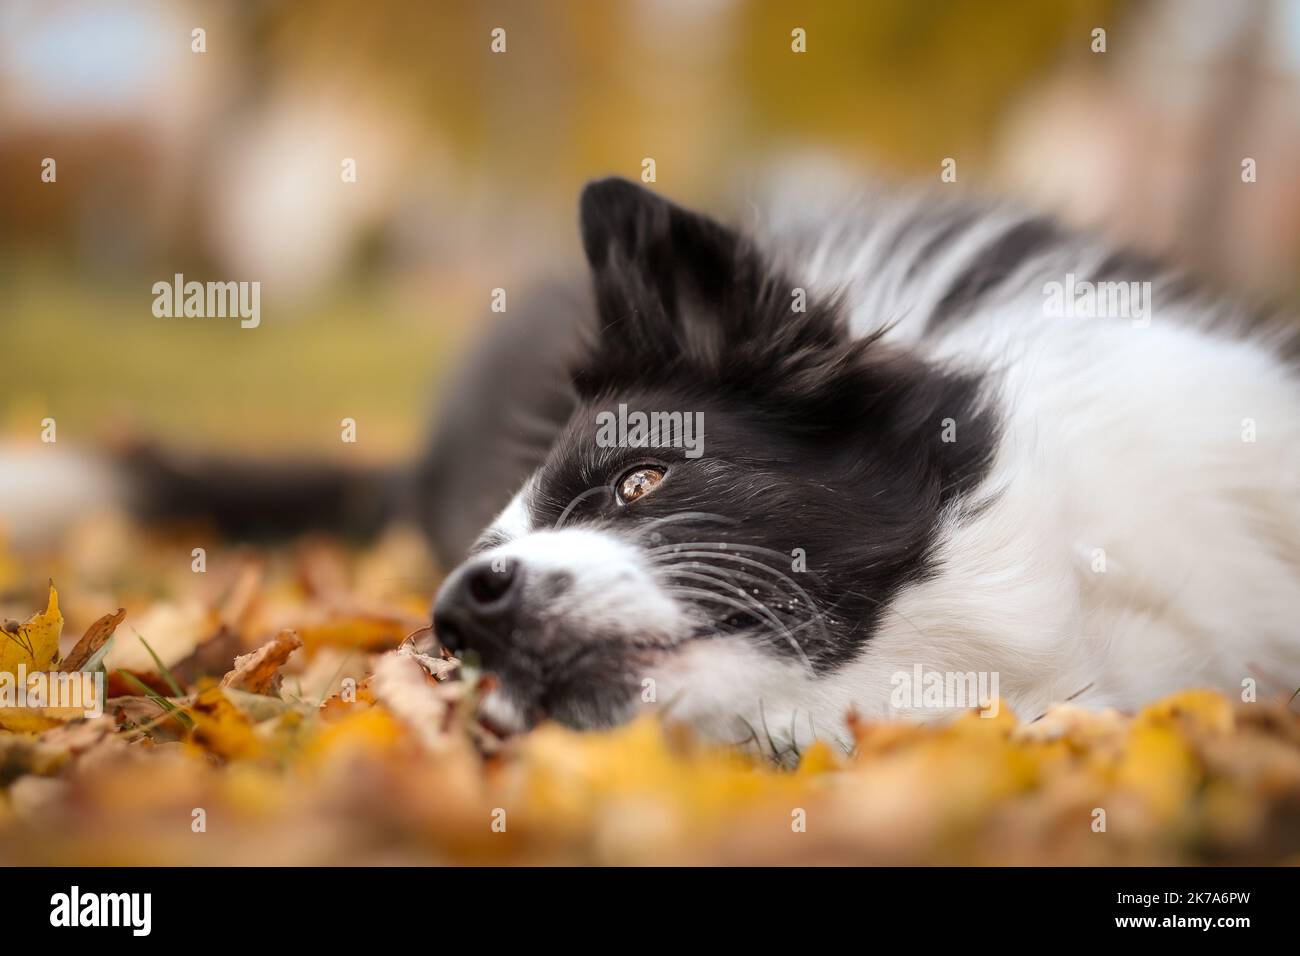 Cute Border Collie Lies Down on Autumn Leaves. Adorable Black and White Dog on Colorful Ground during Fall Season. Stock Photo